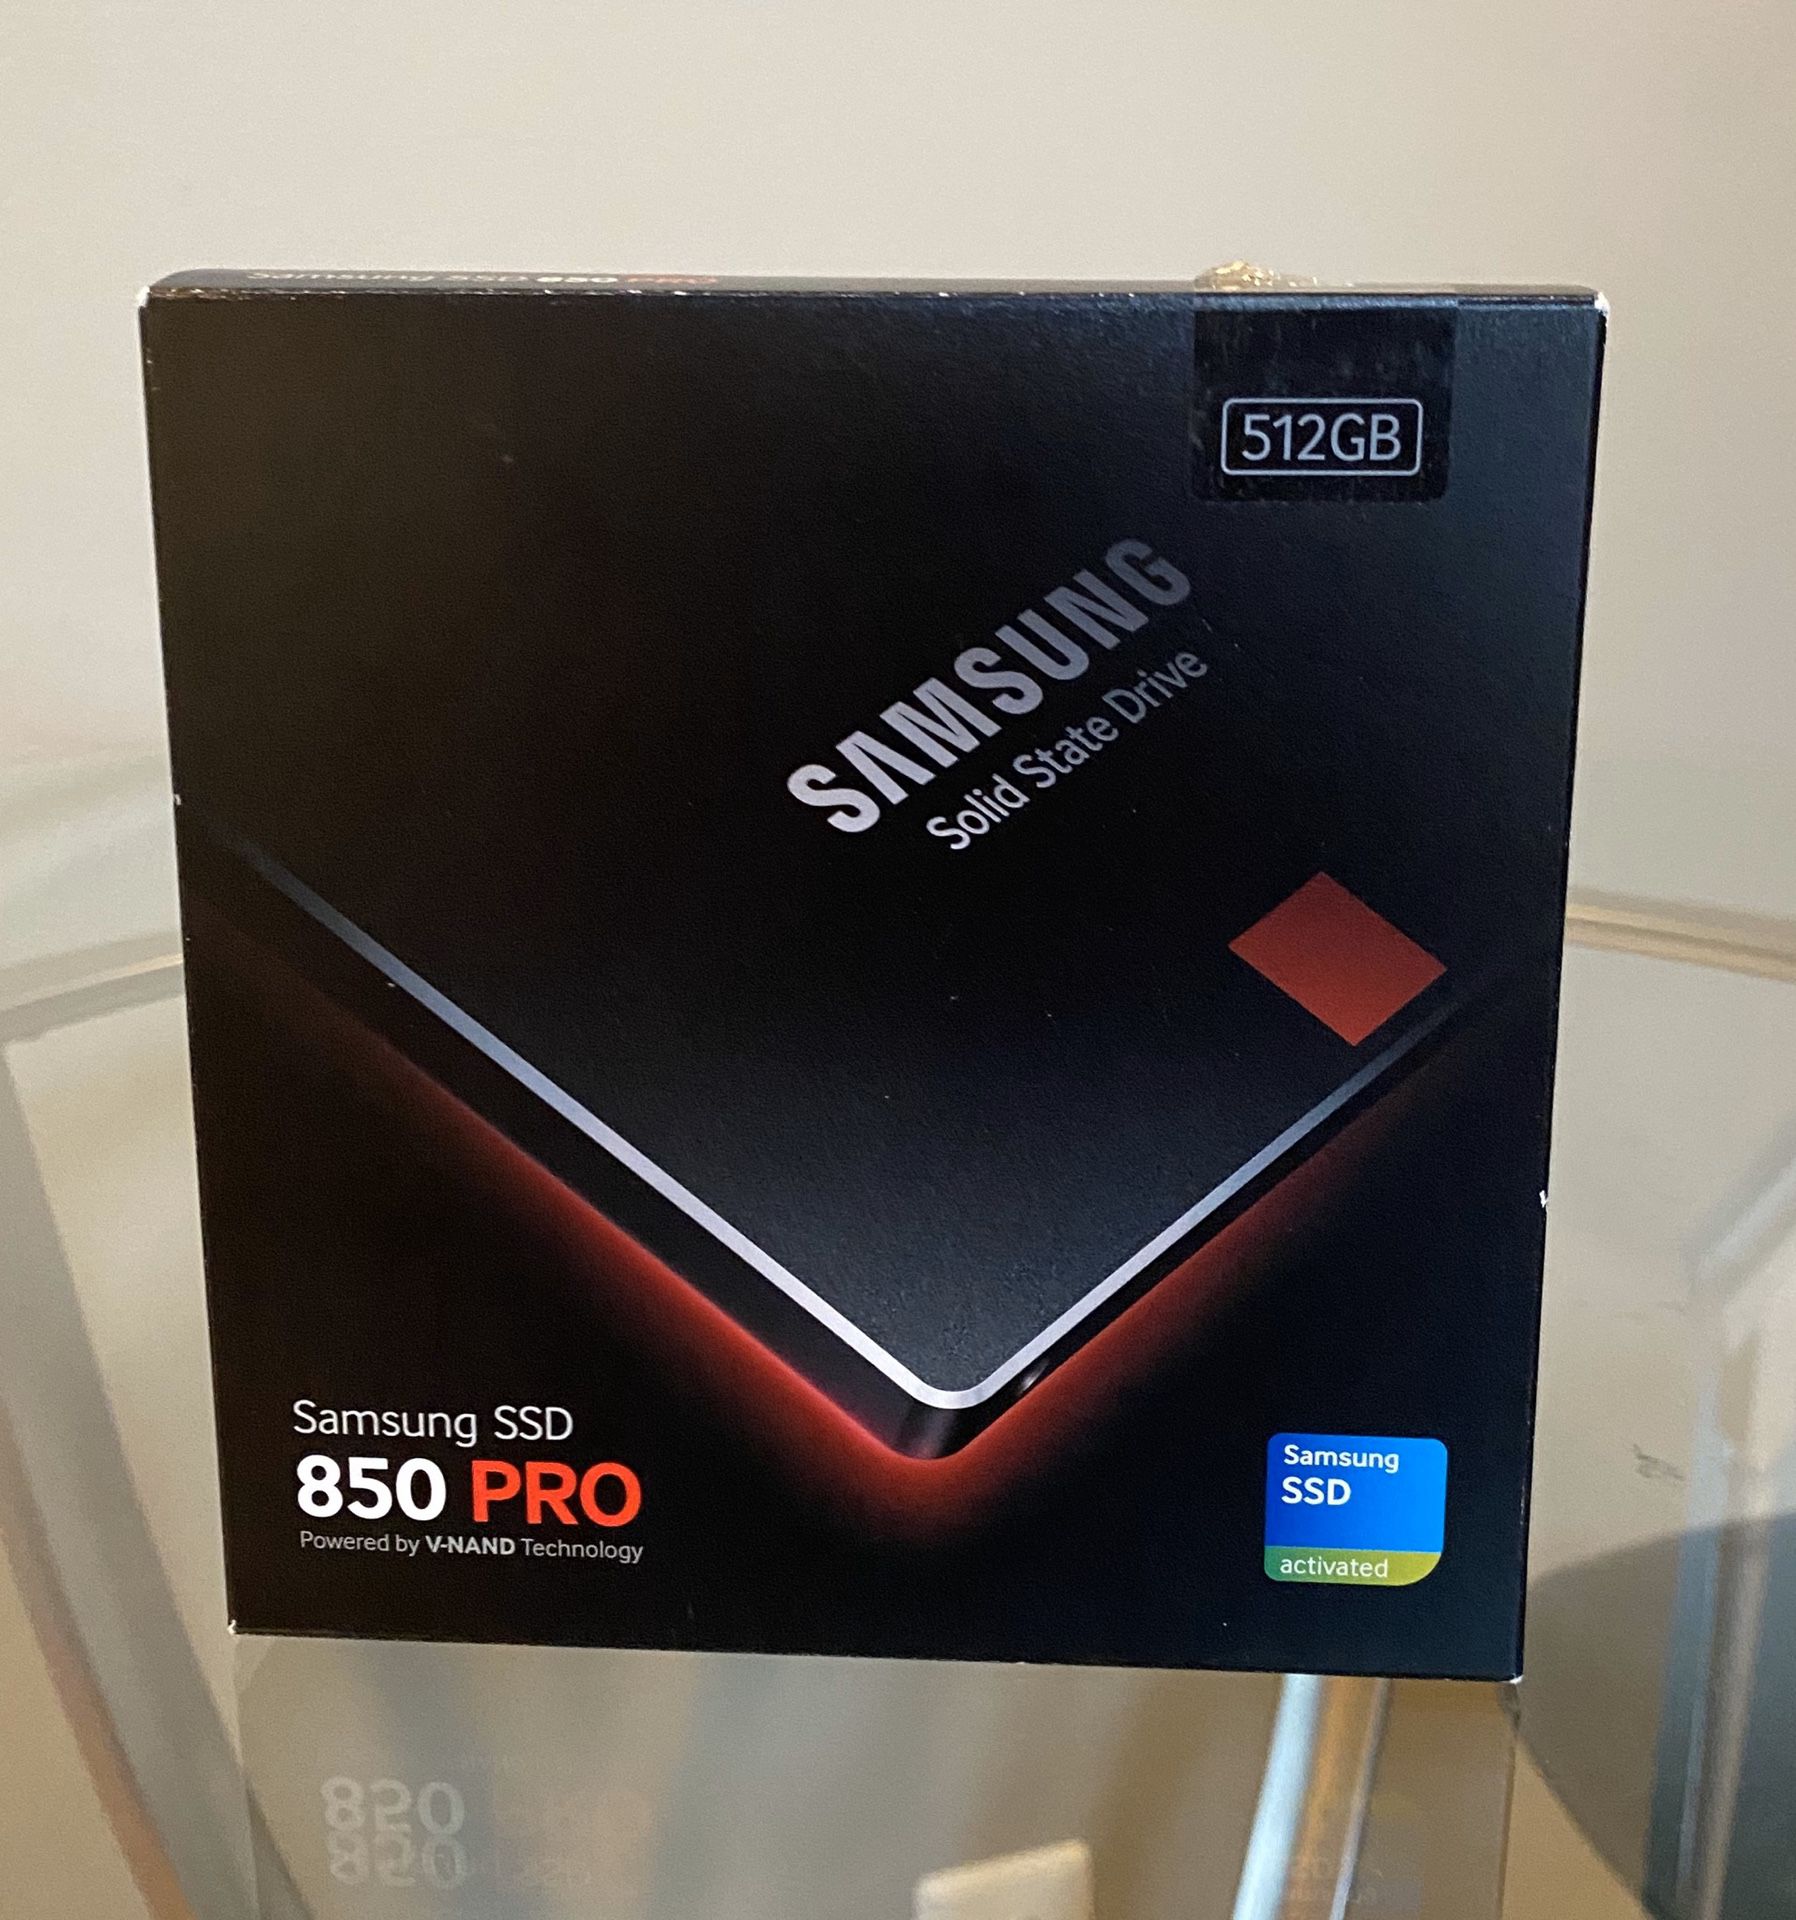 SsD - Solid State Drive Samsung